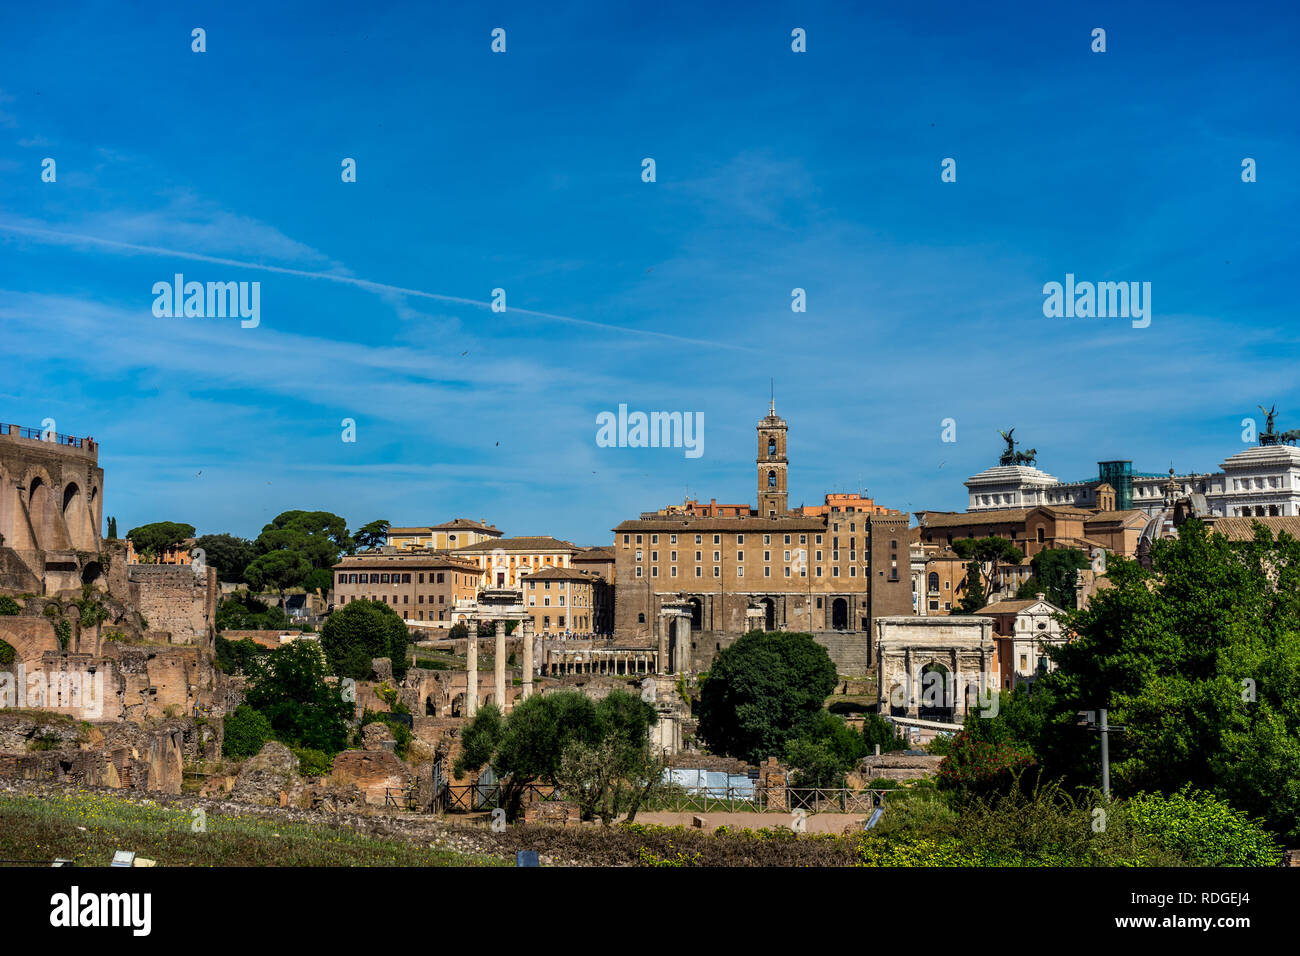 The ancient ruins at the Roman Forum at Rome. Famous world landmark. Scenic urban landscape. Stock Photo